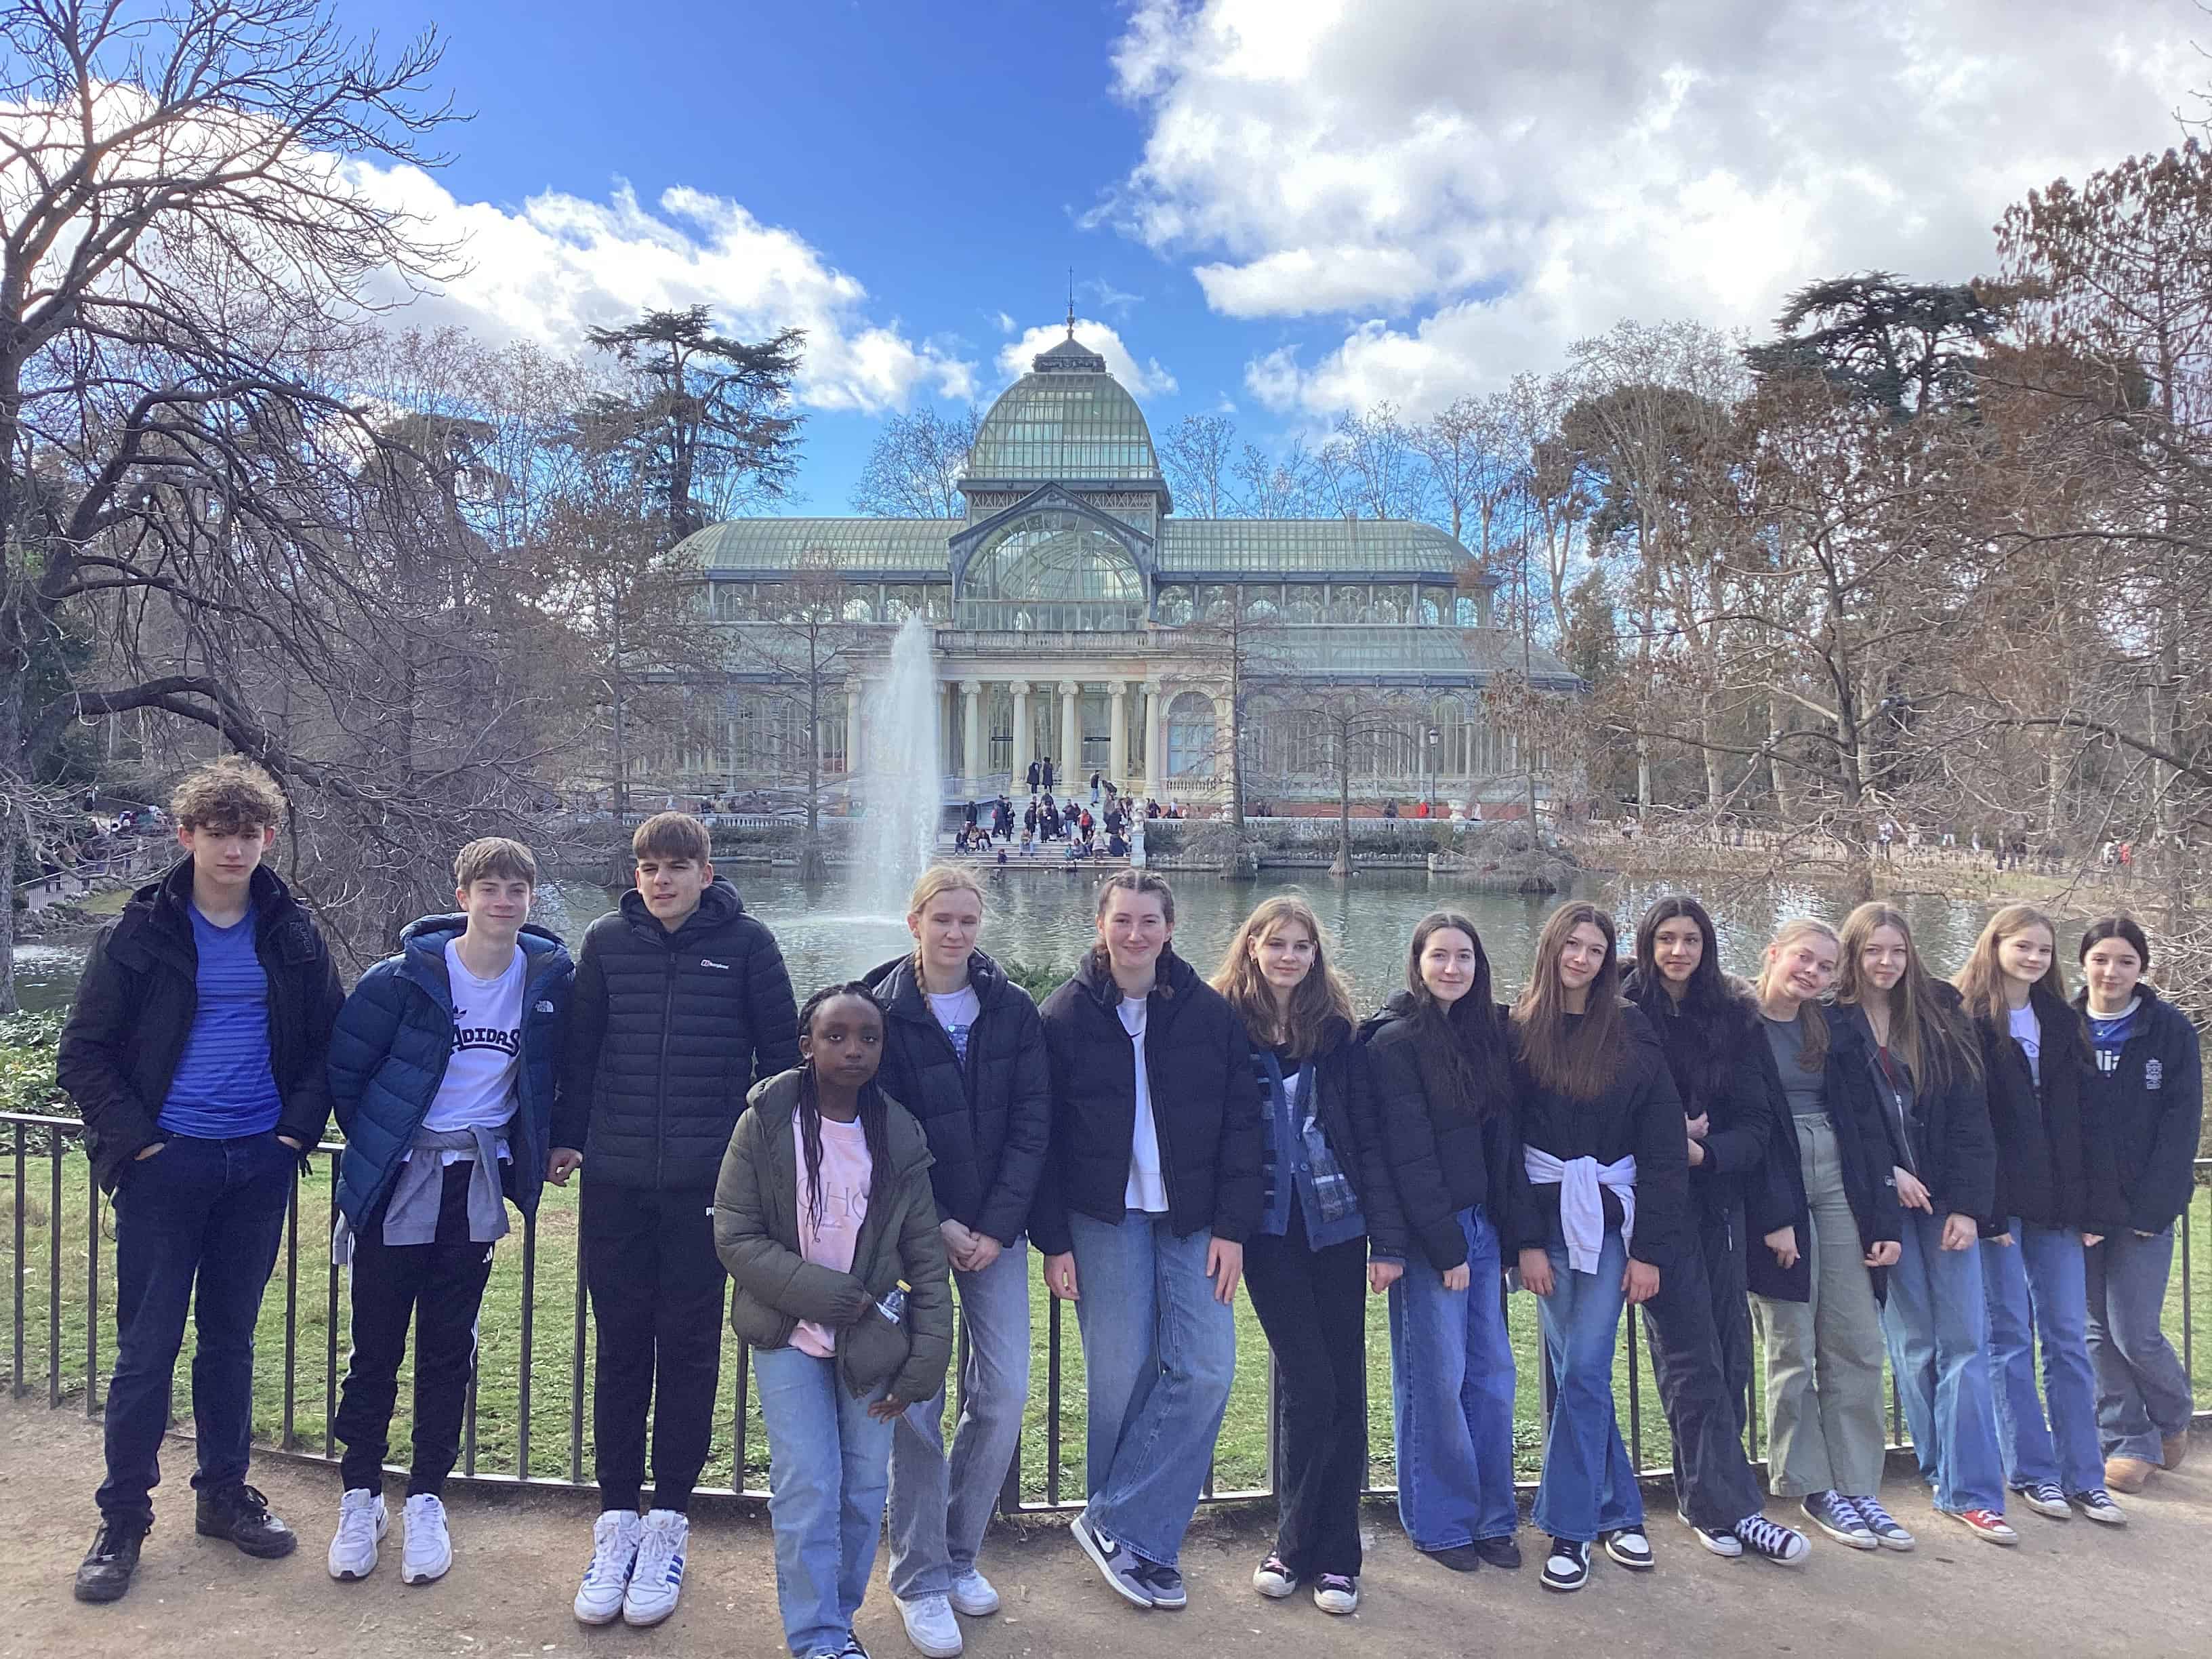 Students from Priestnall School stand in front of a Lake at El Retiro Park.